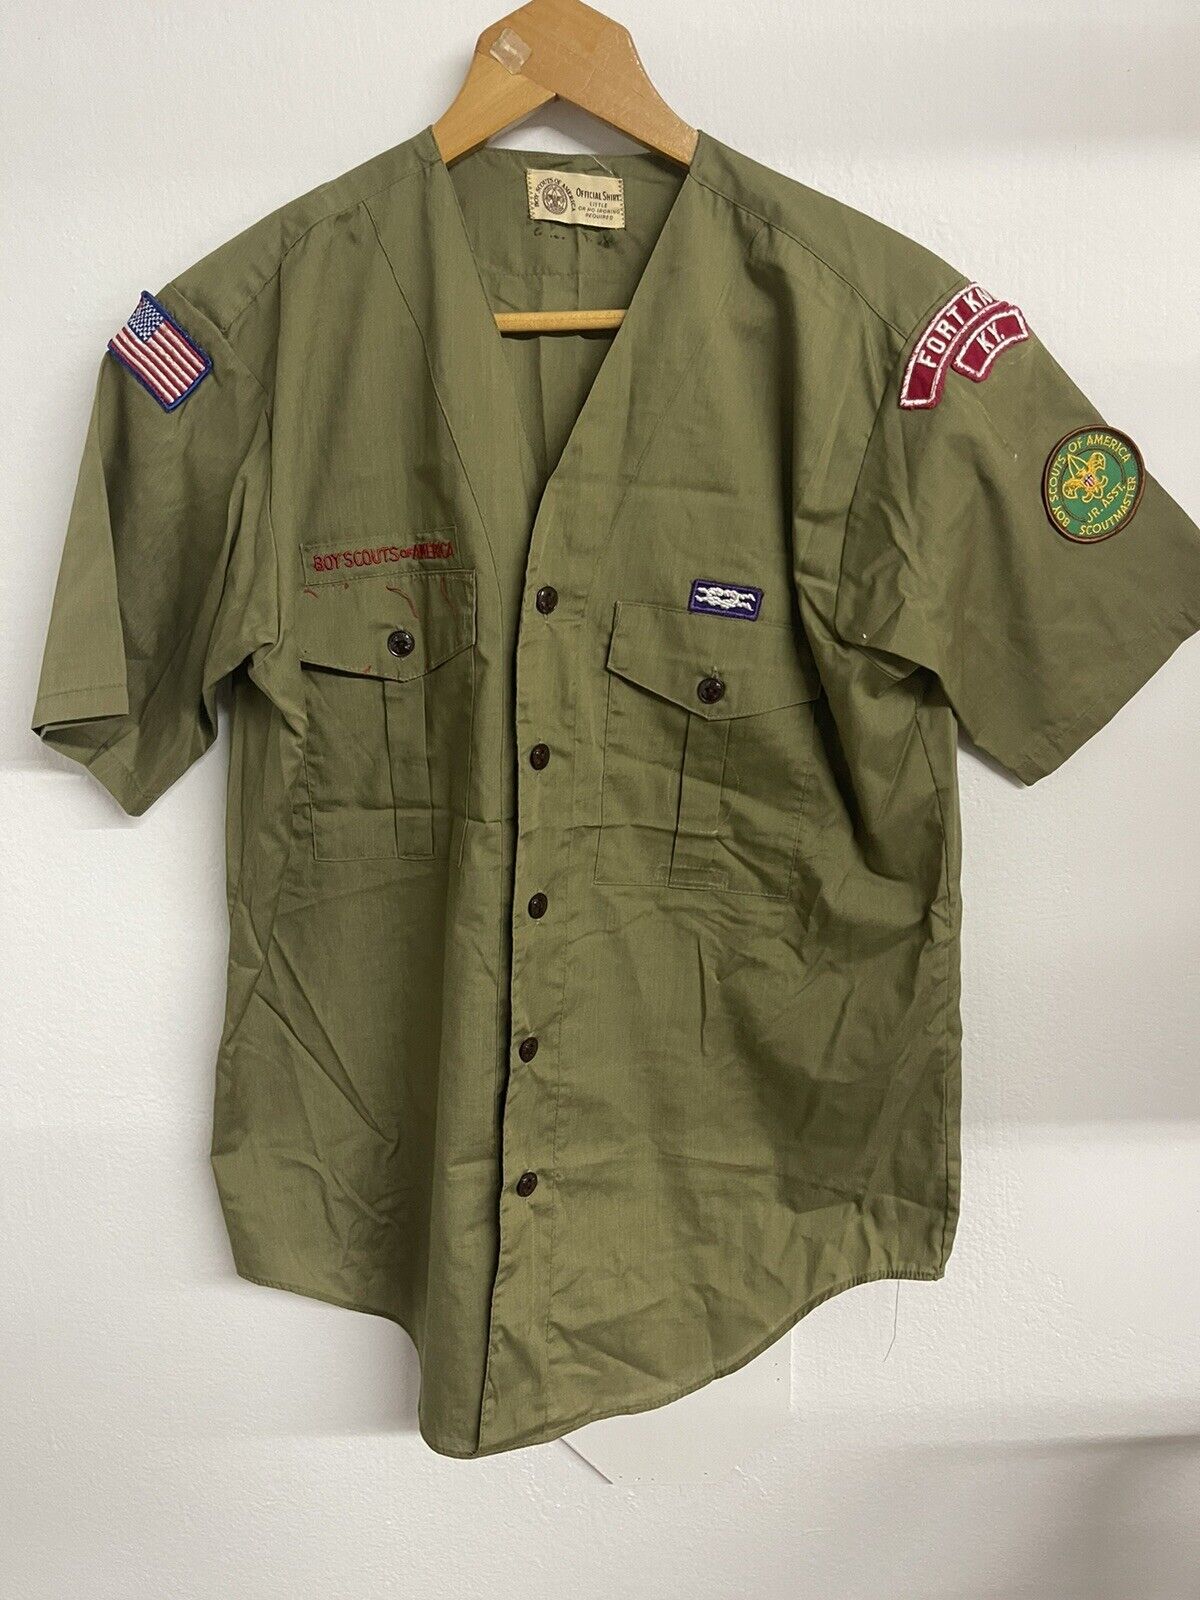 Vintage Boy Scouts Of America BSA Khaki Green Shirt w/ Patches 70s Fort Knox SM